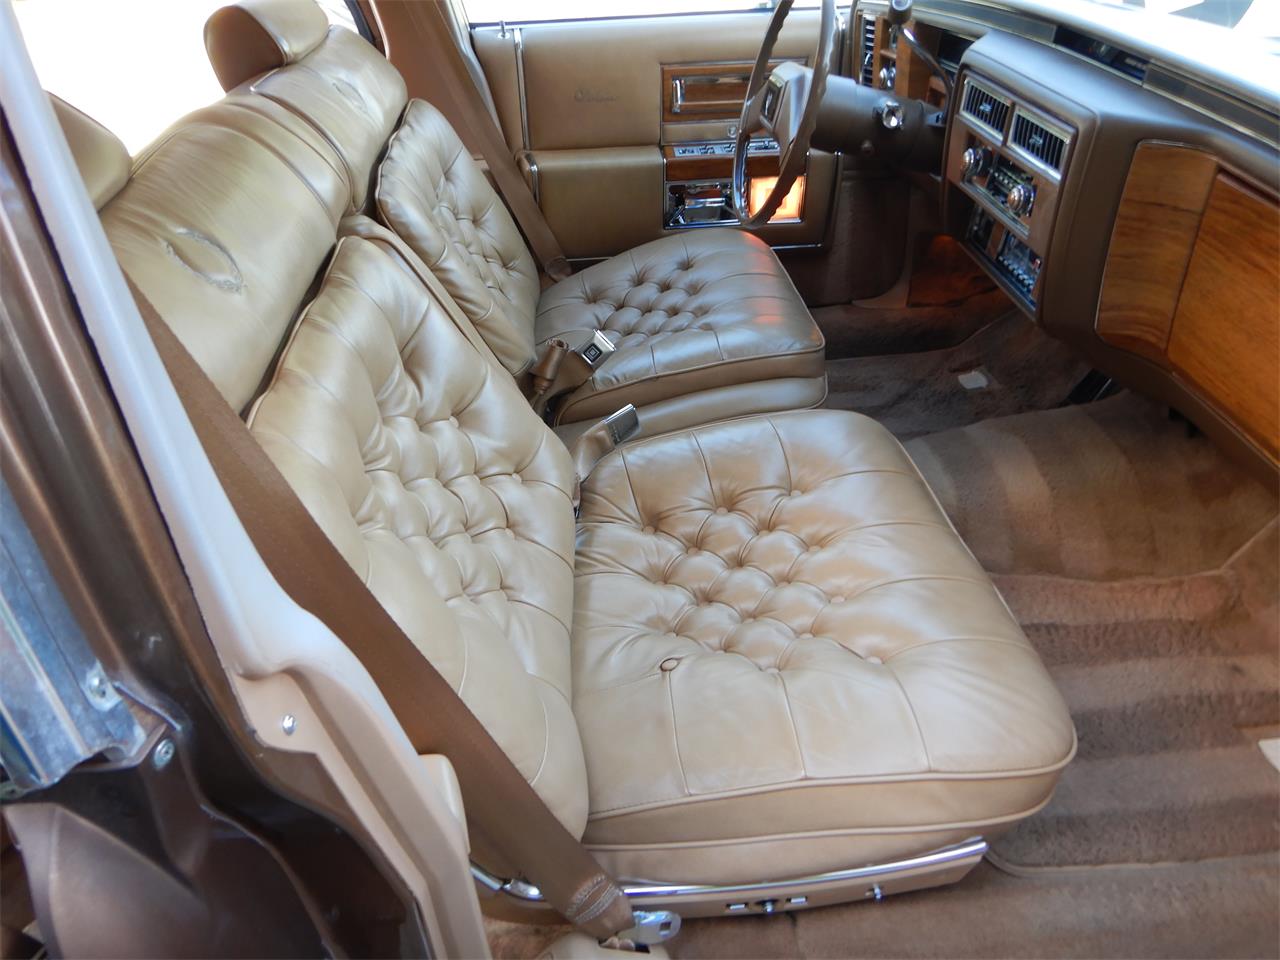 1981 Cadillac Fleetwood Brougham for sale in Woodland Hills, CA – photo 82